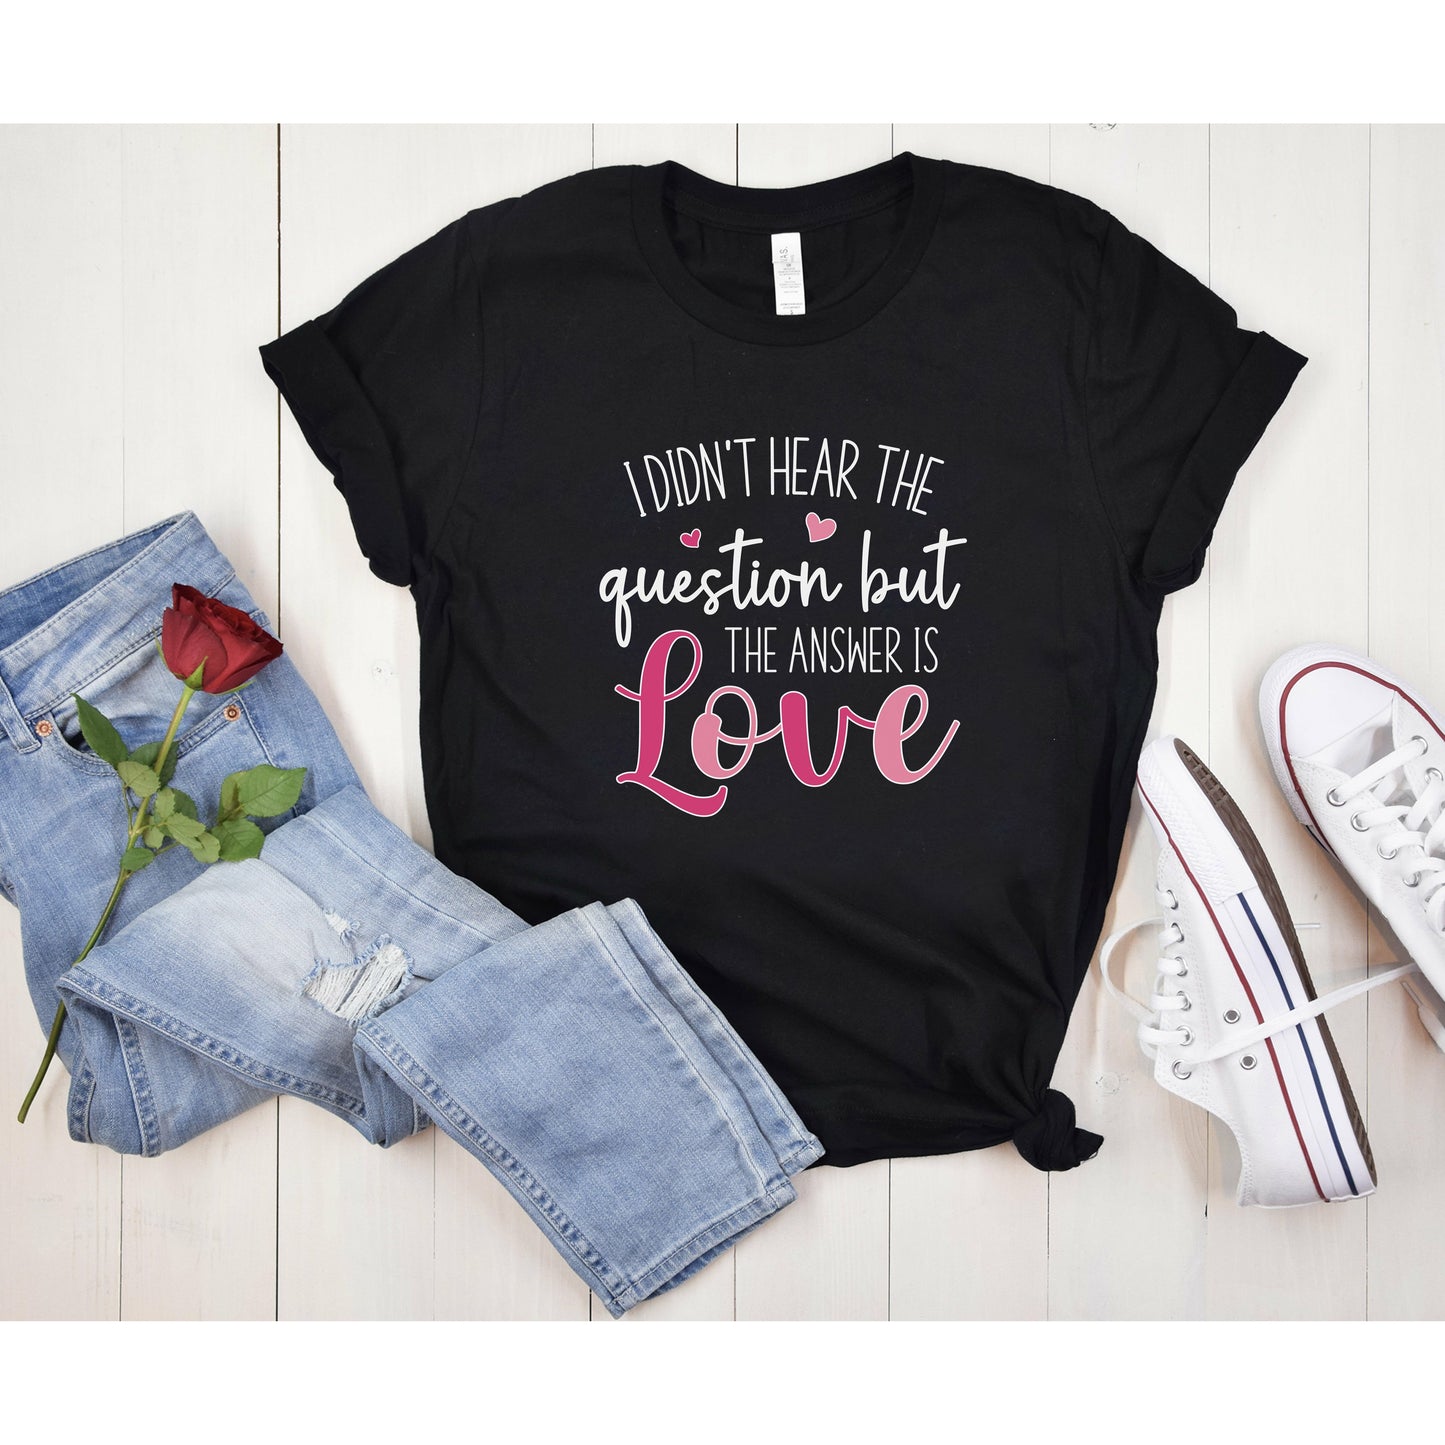 I Didn't Hear The Question But The Answer is Love Shirt | Christian T-Shirt for Women